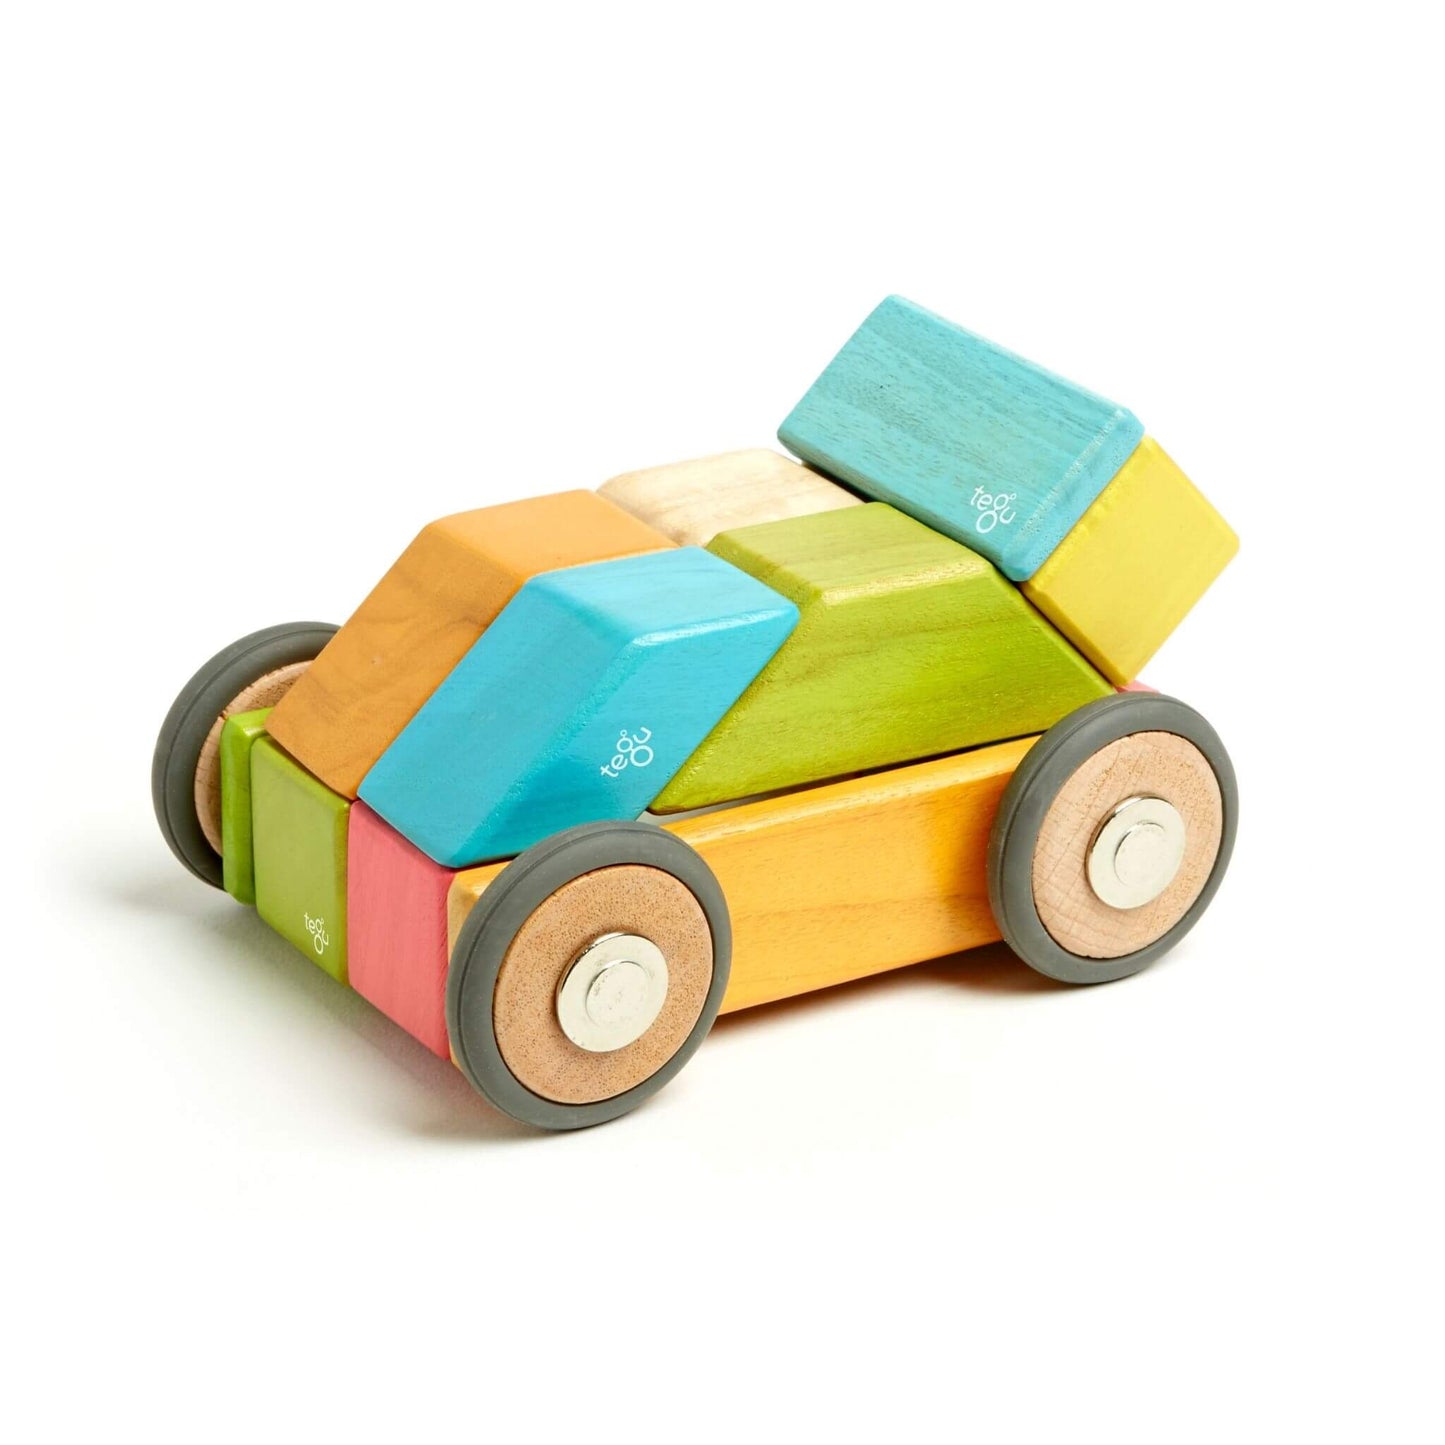 42 Piece Magnetic Wooden Building Blocks - toy car